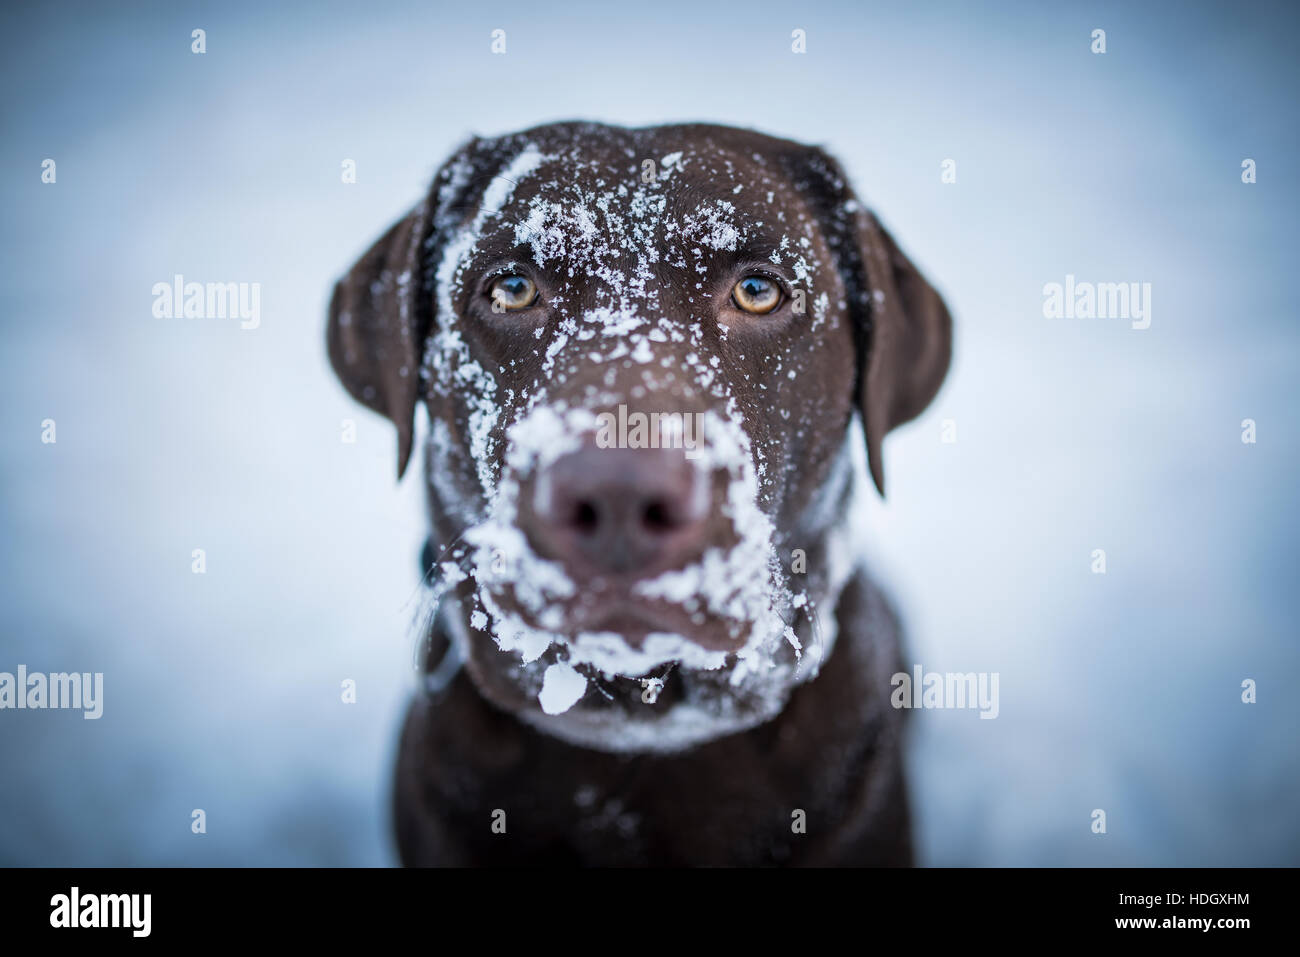 Brown Labrador Retriever looking funny with snow all over her face. Stock Photo